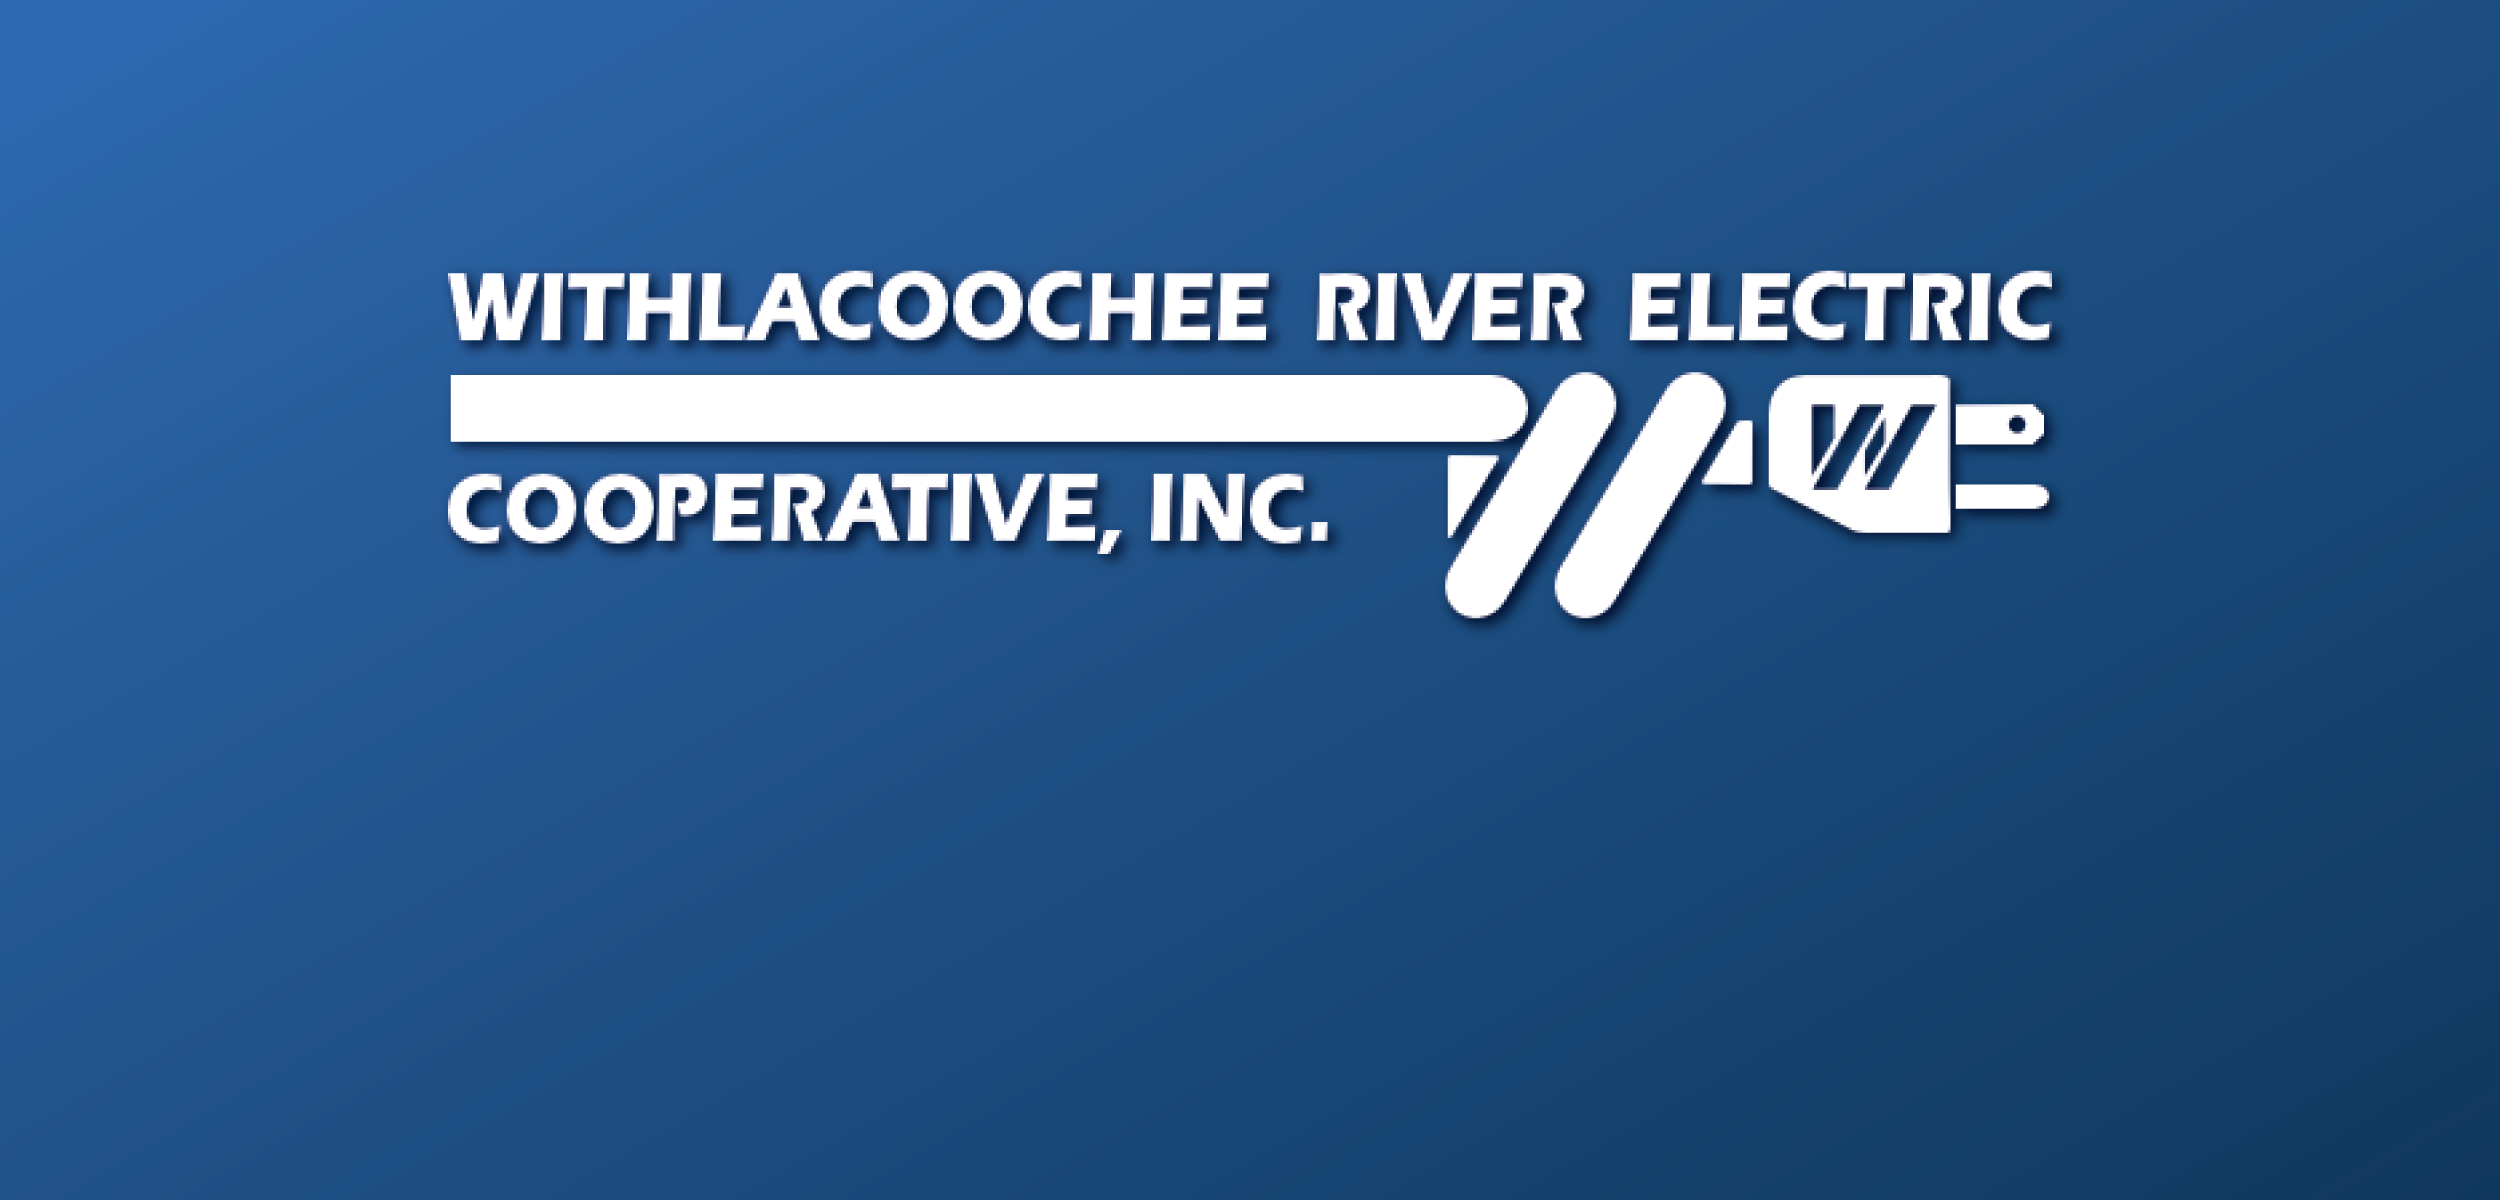 Going solar with Withlacoochee River Electric Cooperative (WREC)